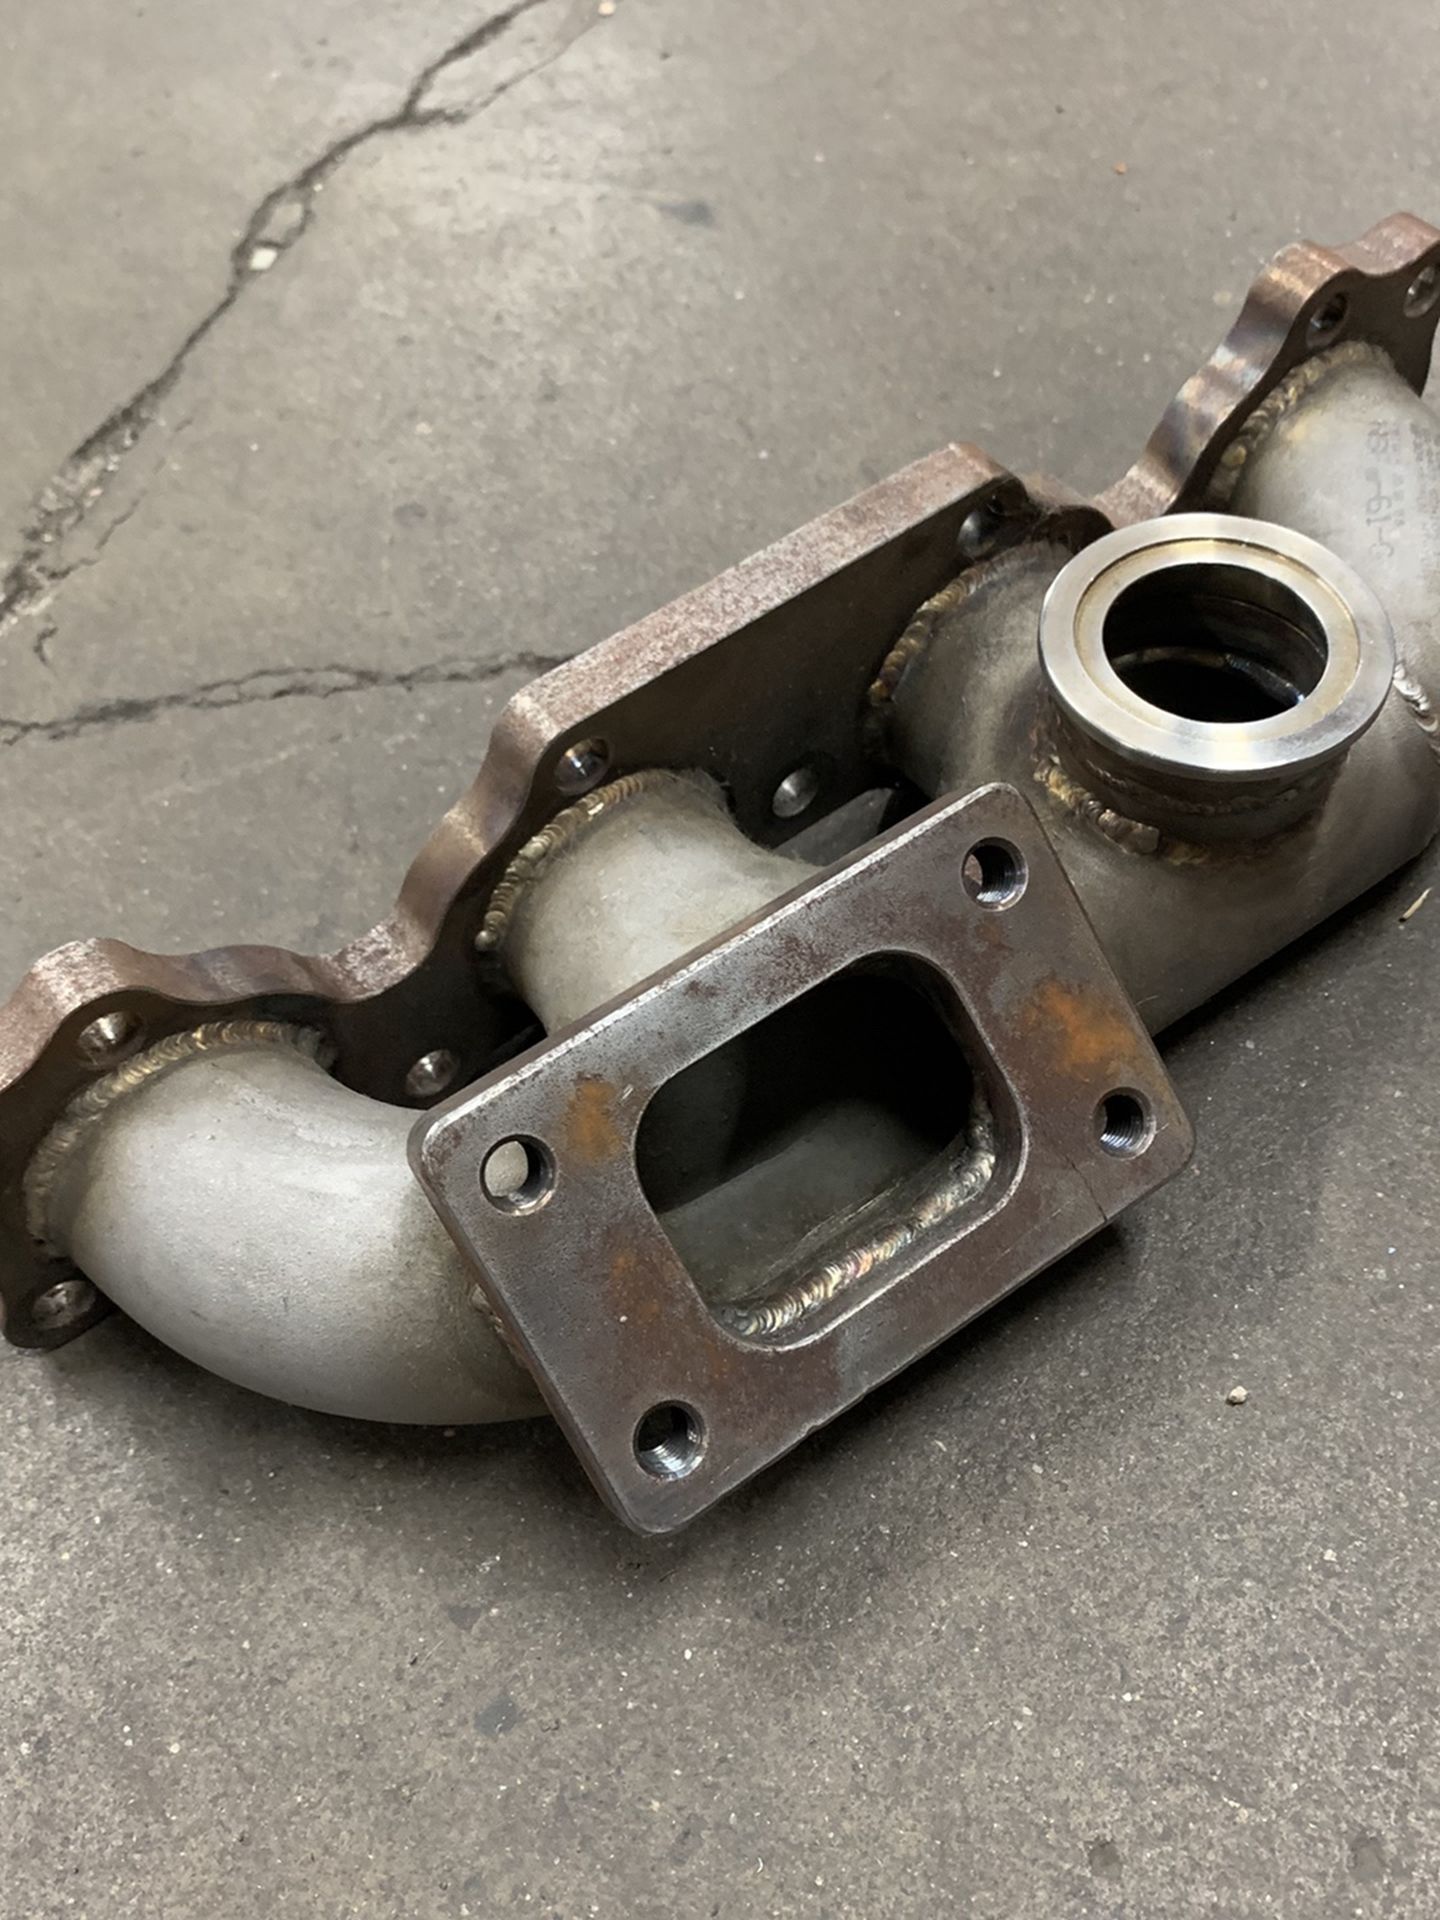 1.6 Mazda Miata turbo exhaust manifold with v band flange for external waste gate.